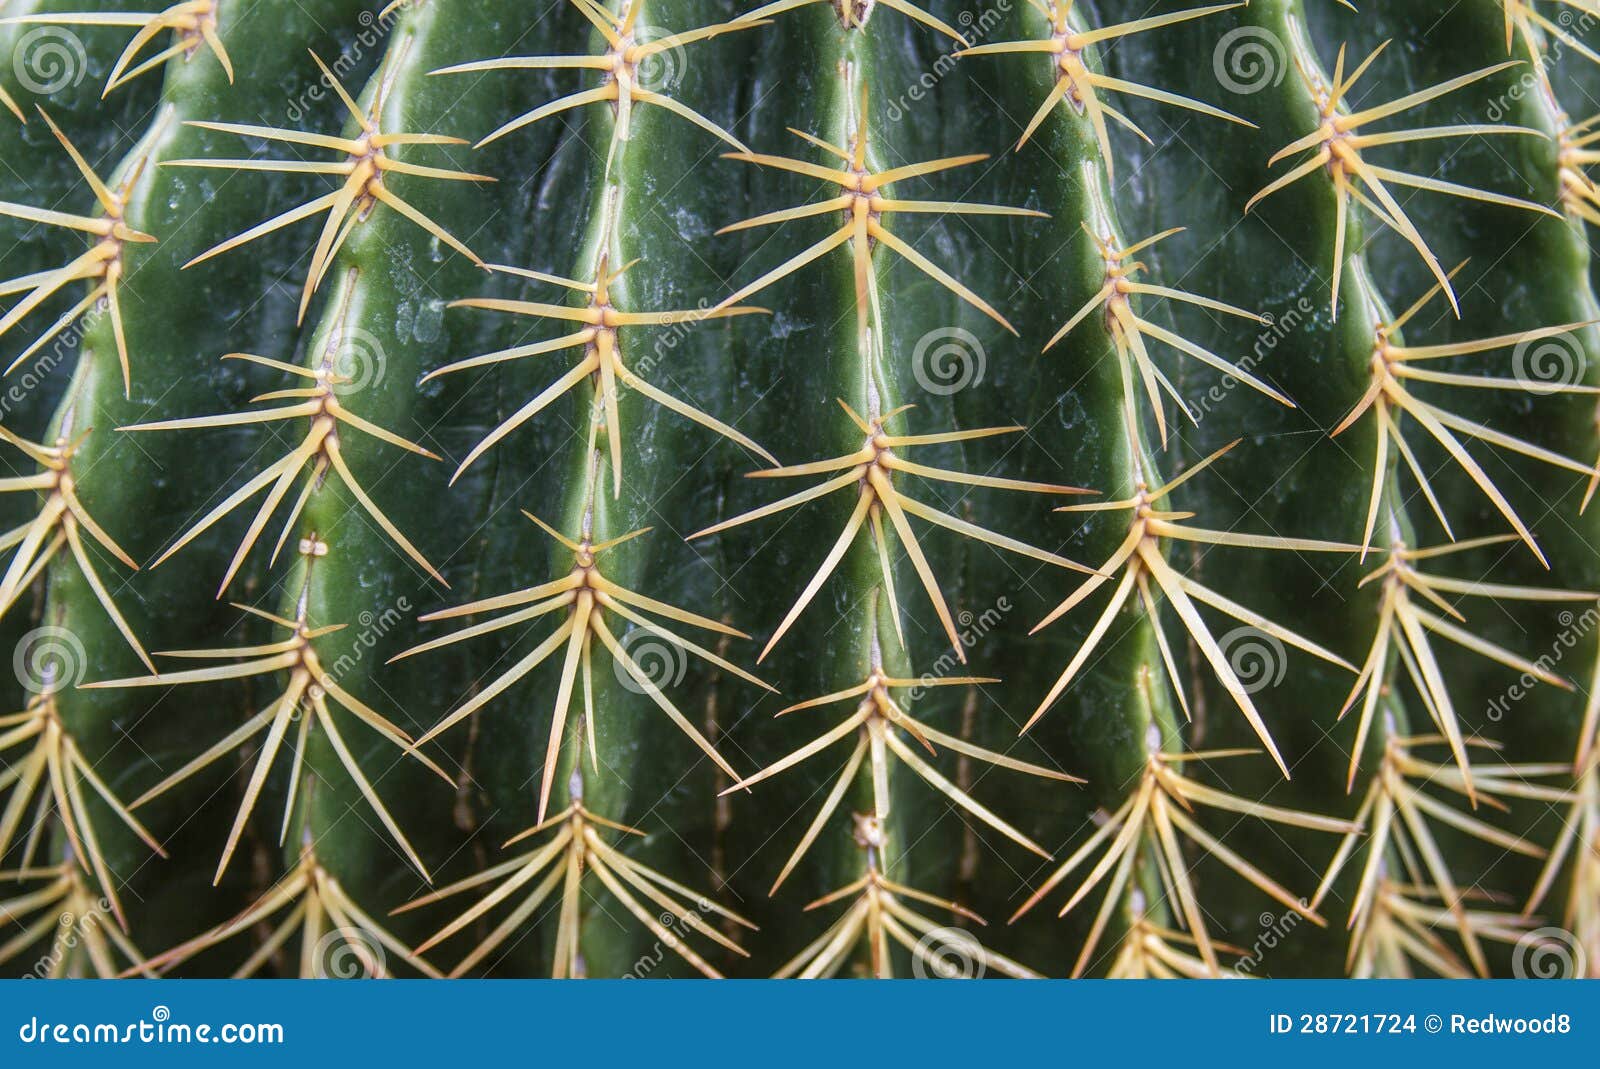 cacti spines